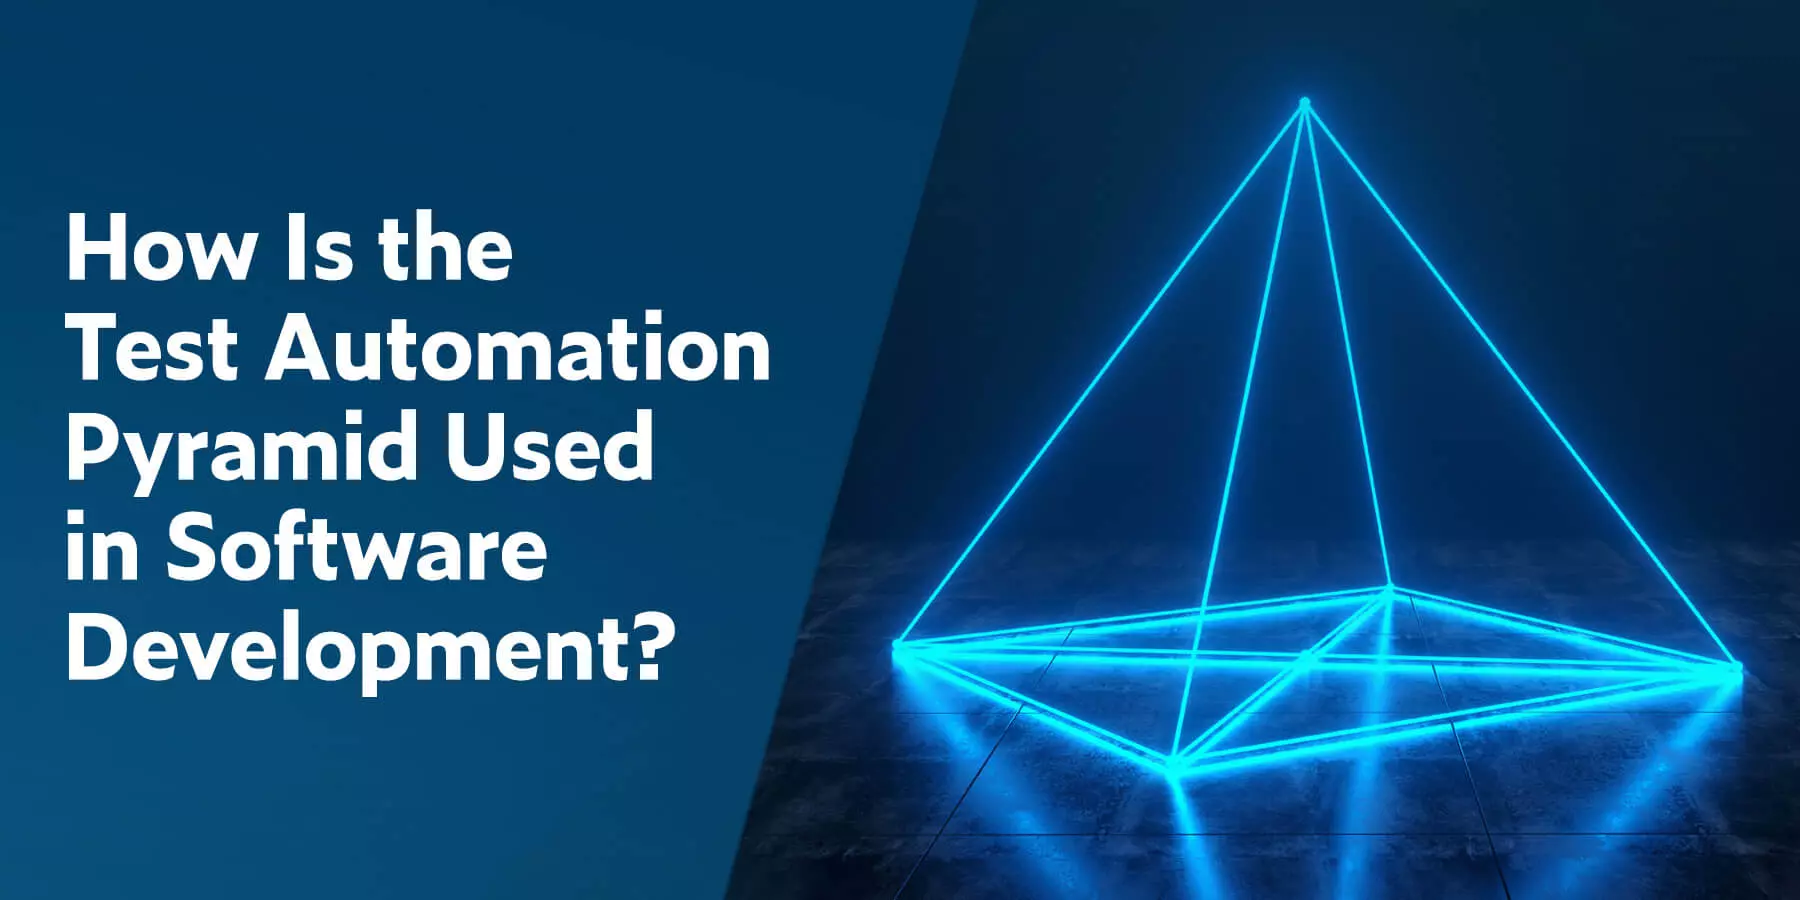 How Is the Test Automation Pyramid Used in Software Development?